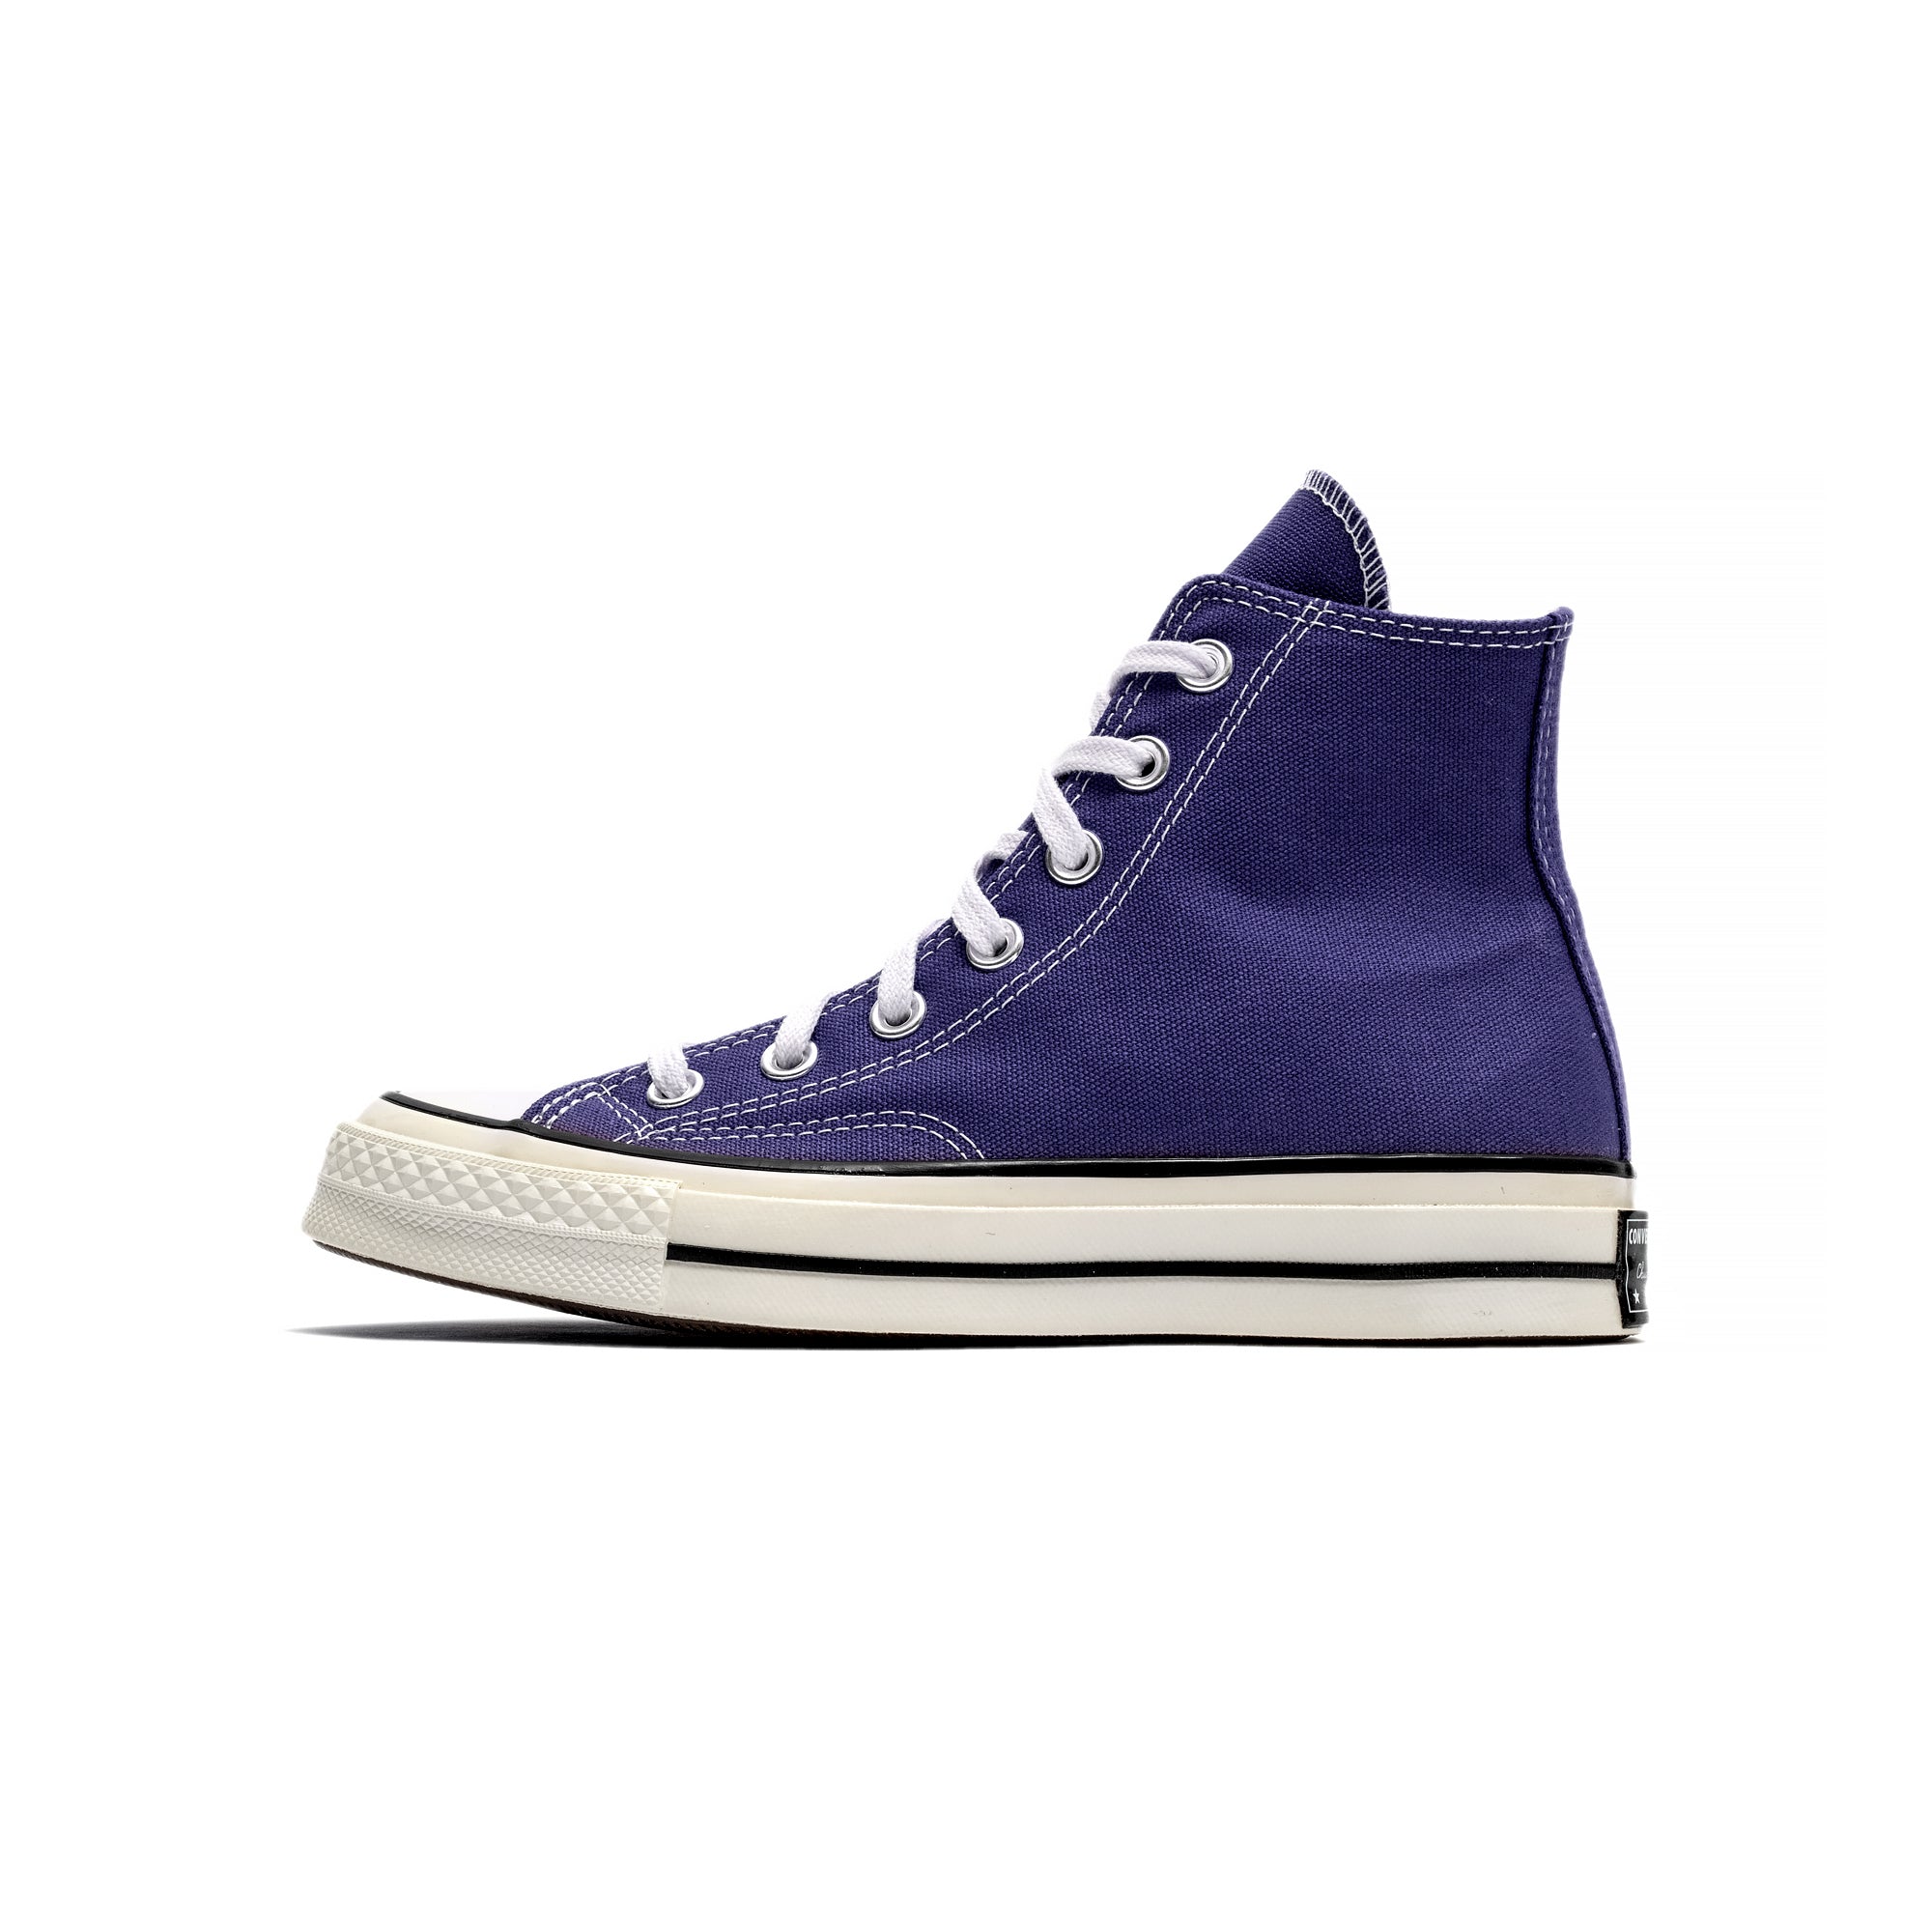 Converse Chuck 70 Hi Shoes 'Uncharted Waters' – Extra Butter